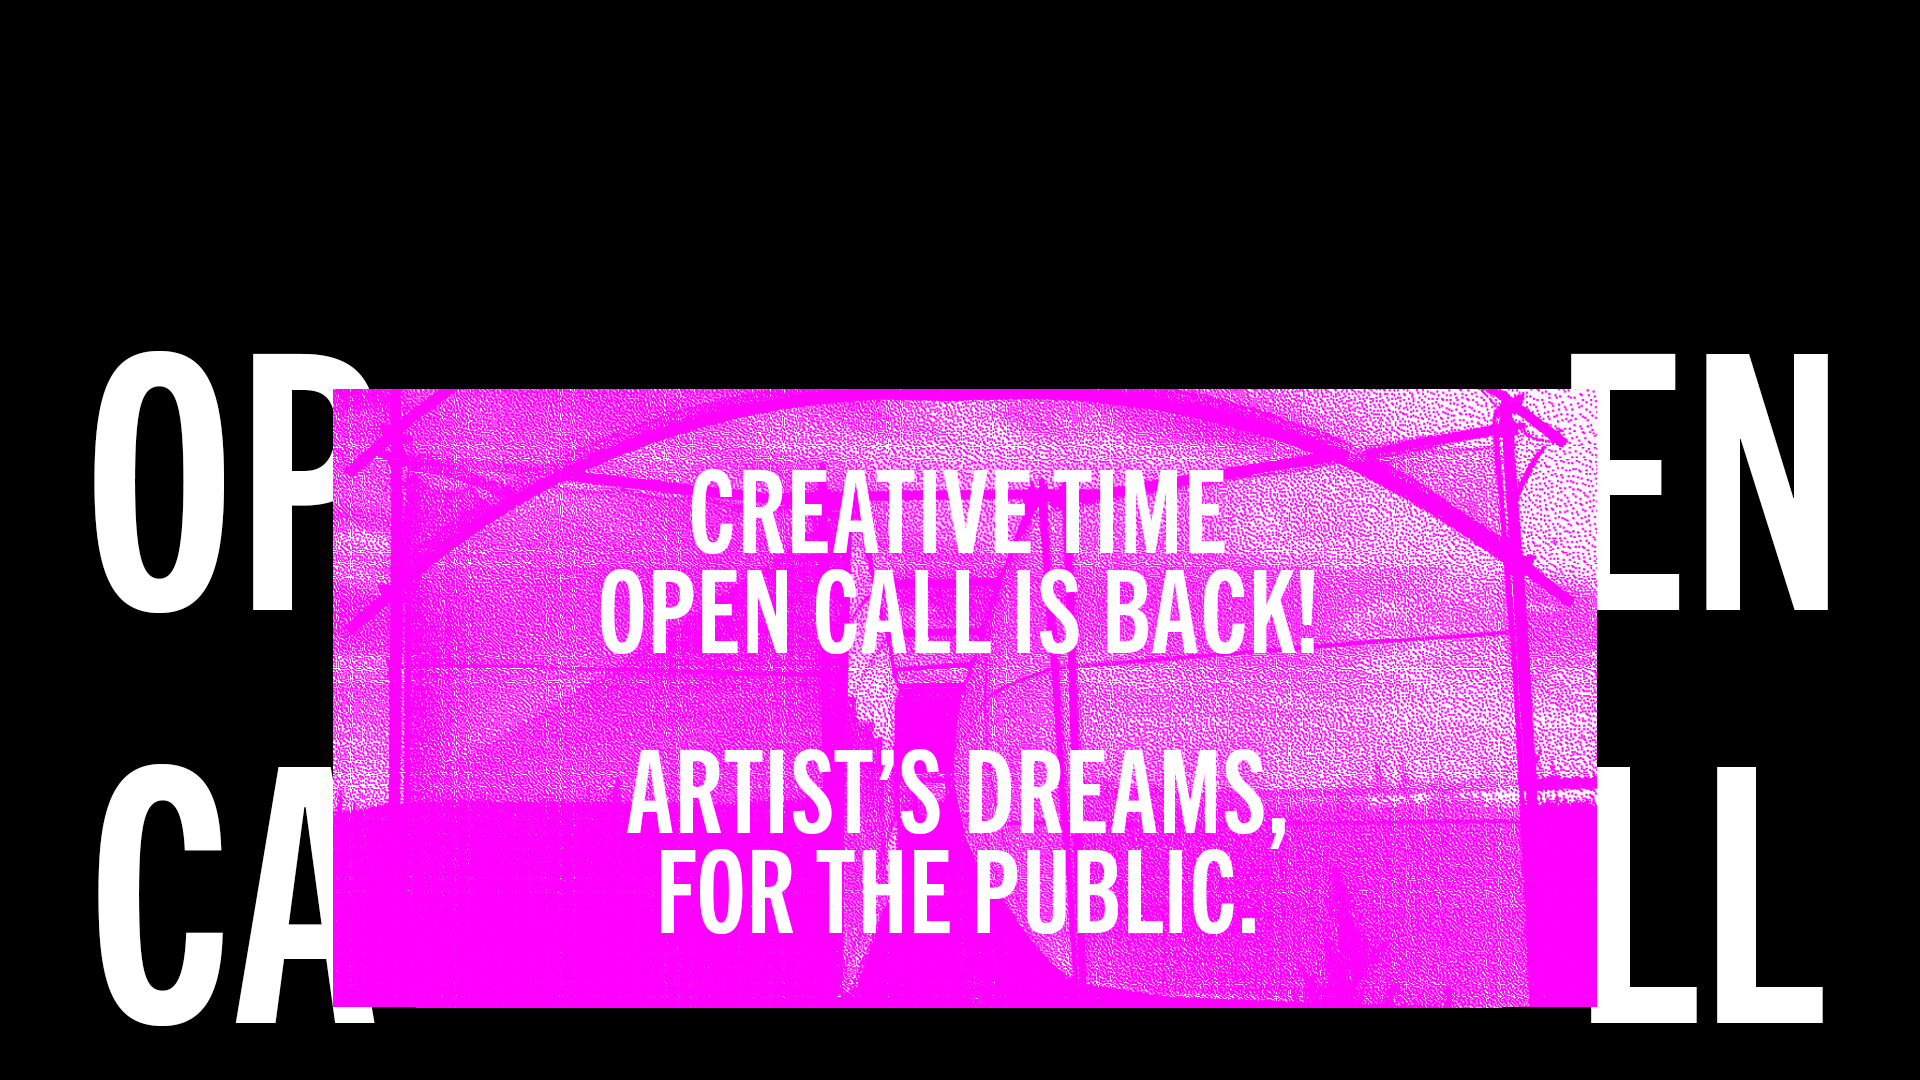 Creative Time Open Call is Back! Artist's Dreams, For the Public.